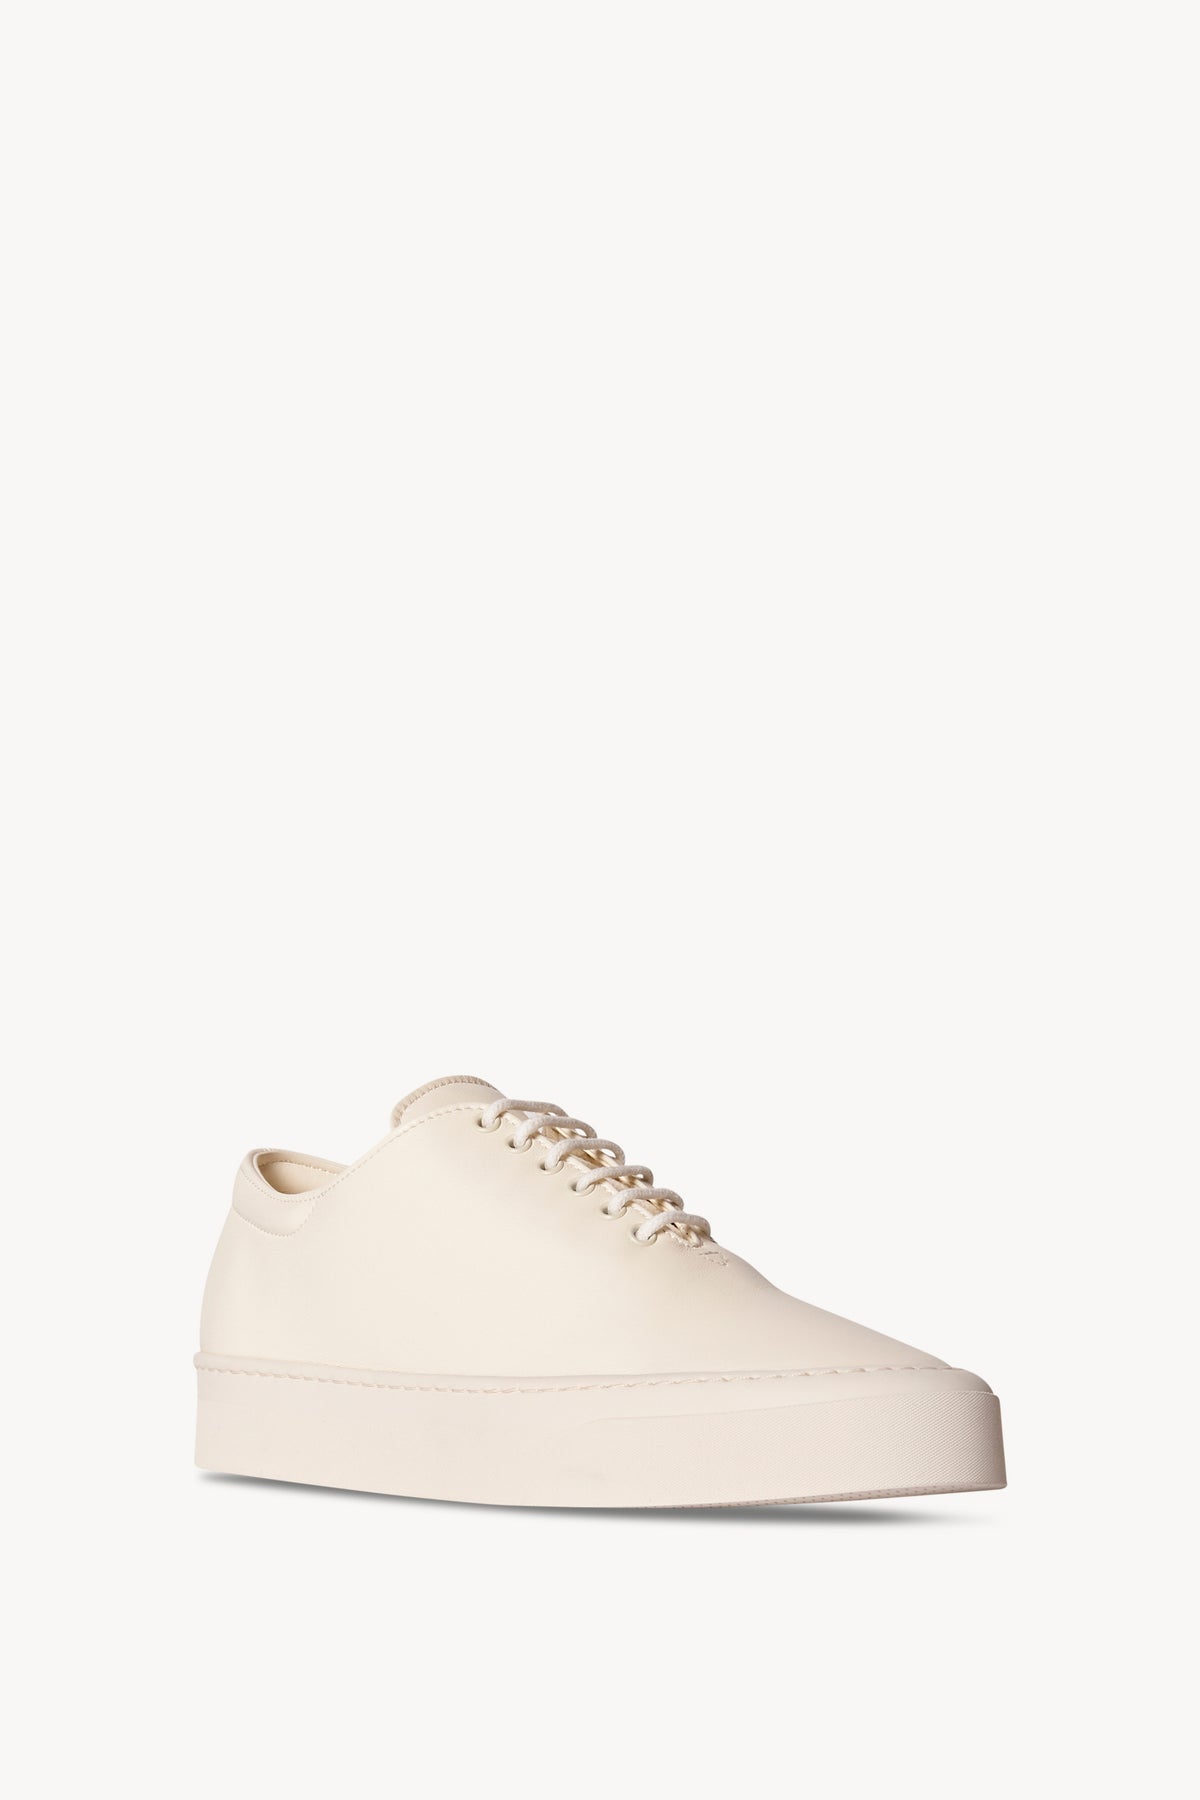 Marie H Lace-Up in pelle